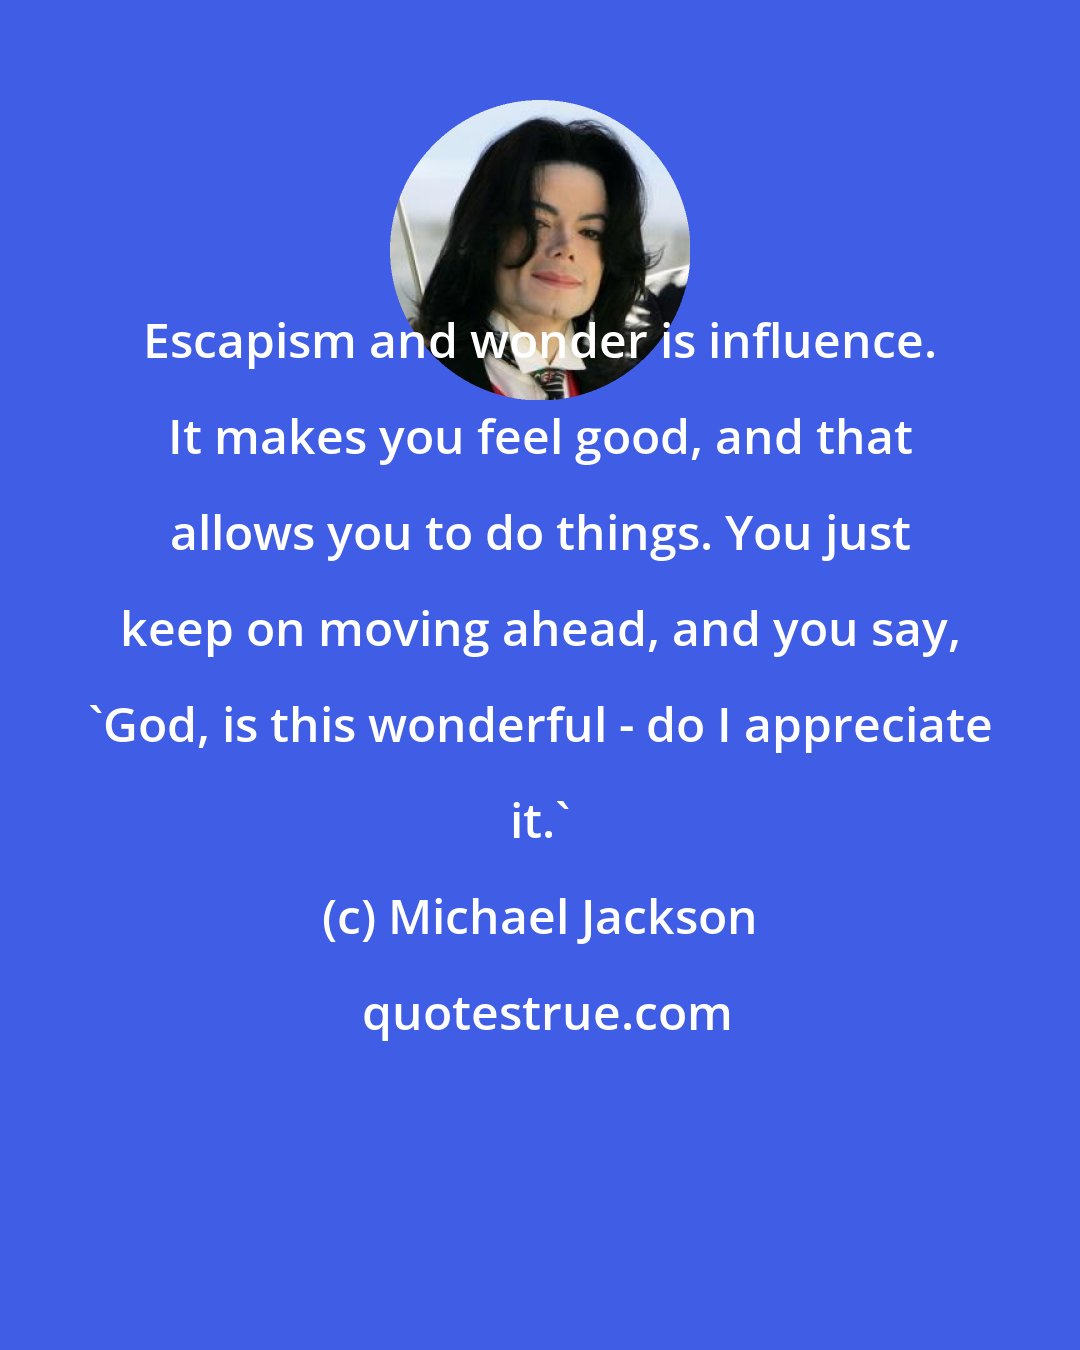 Michael Jackson: Escapism and wonder is influence. It makes you feel good, and that allows you to do things. You just keep on moving ahead, and you say, 'God, is this wonderful - do I appreciate it.'